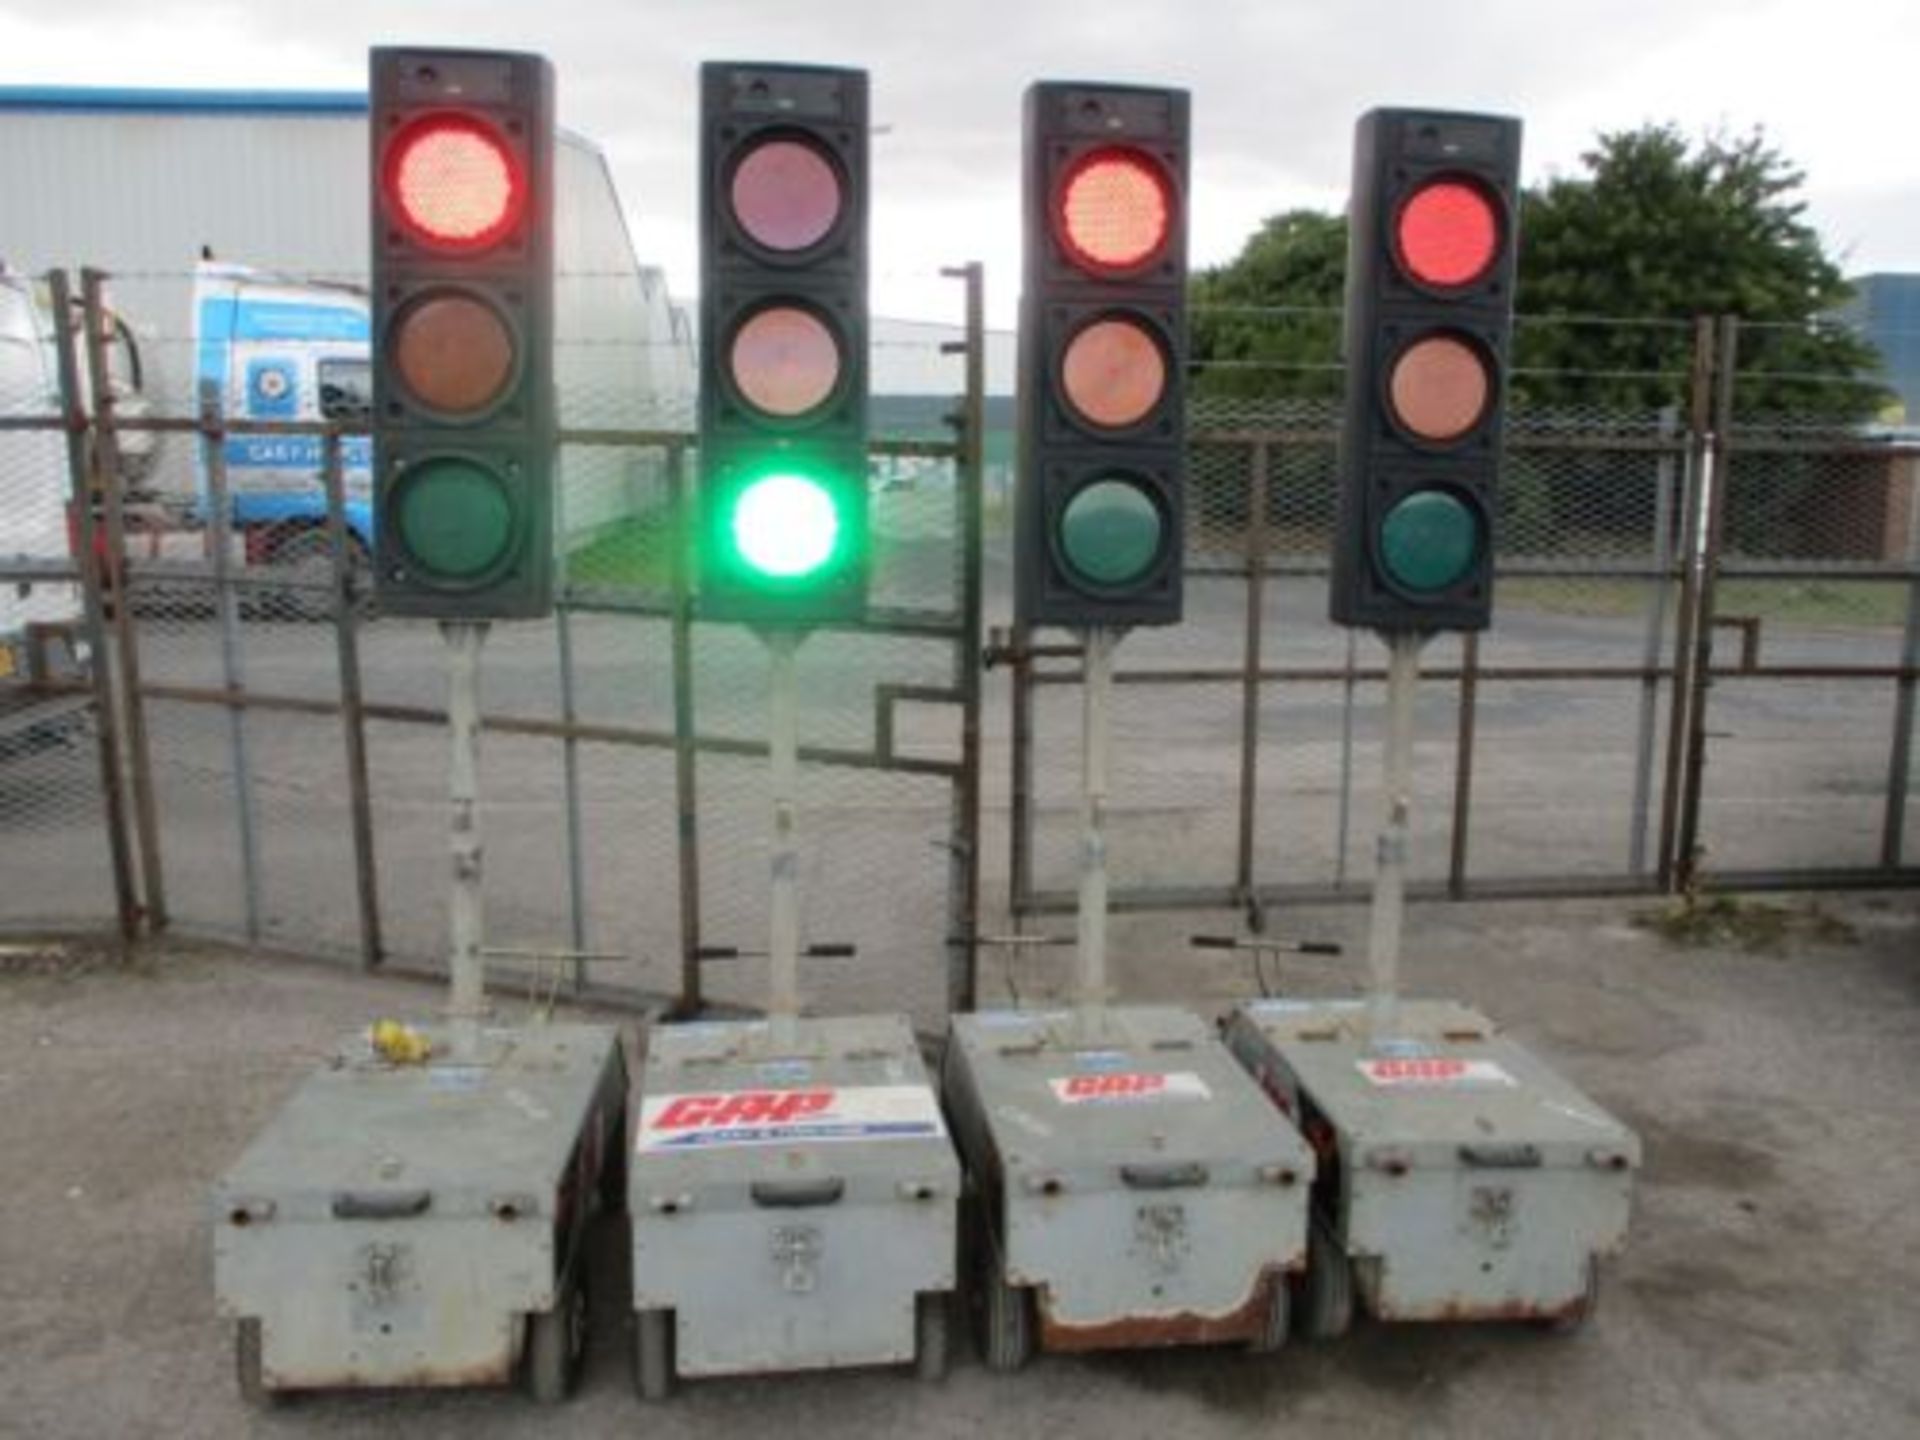 PIKE TRAFFIC LIGHTS XL2 RADIO LIGHT BATTERY 4 WAY MICRO SRL 2 DELIVERY ARRANGED - Image 8 of 8